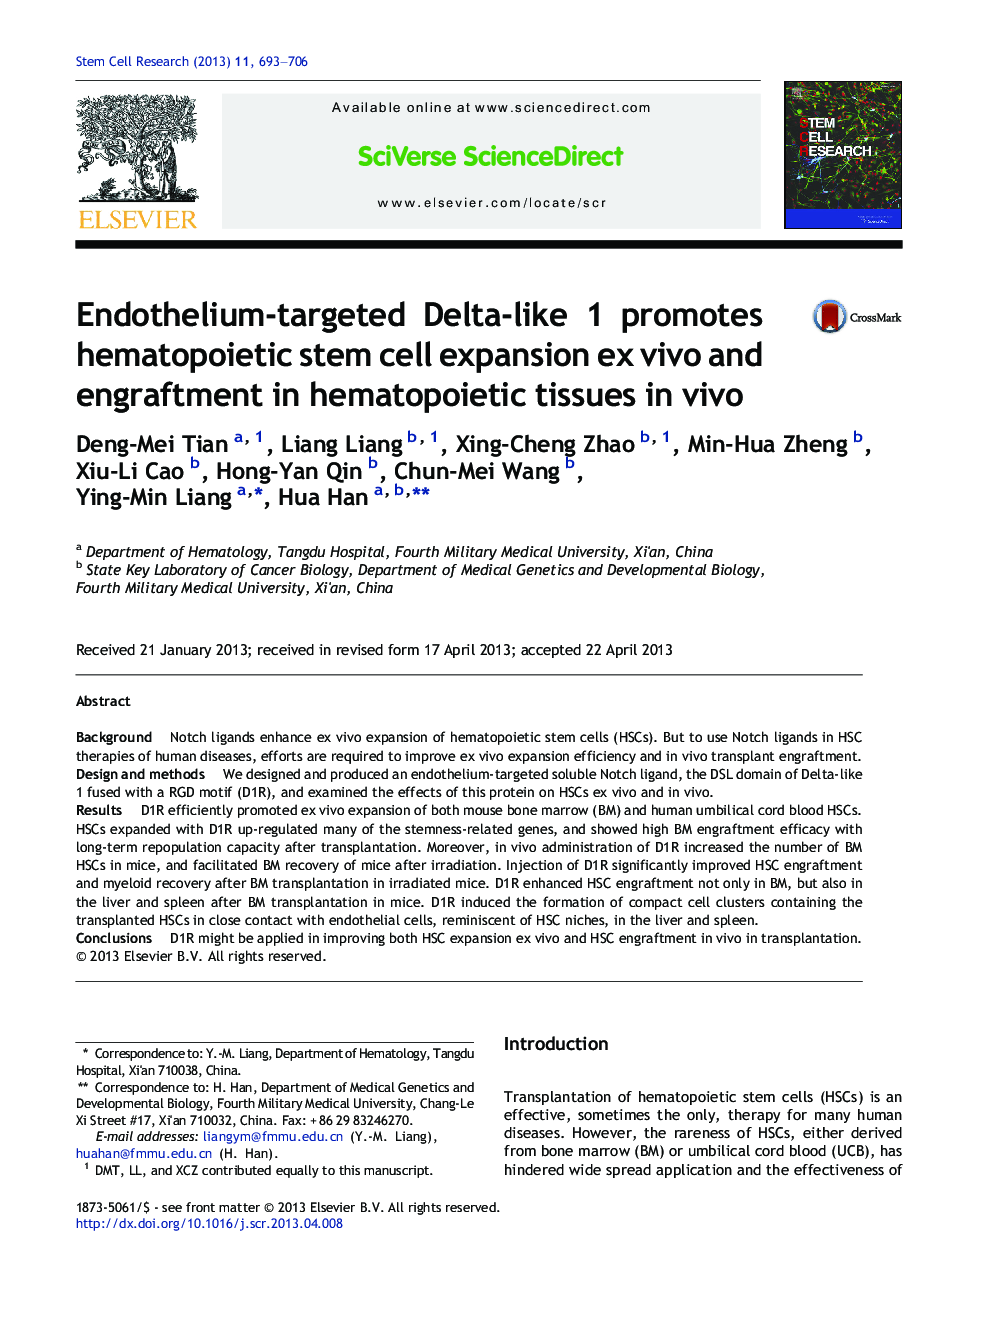 Endothelium-targeted Delta-like 1 promotes hematopoietic stem cell expansion ex vivo and engraftment in hematopoietic tissues in vivo